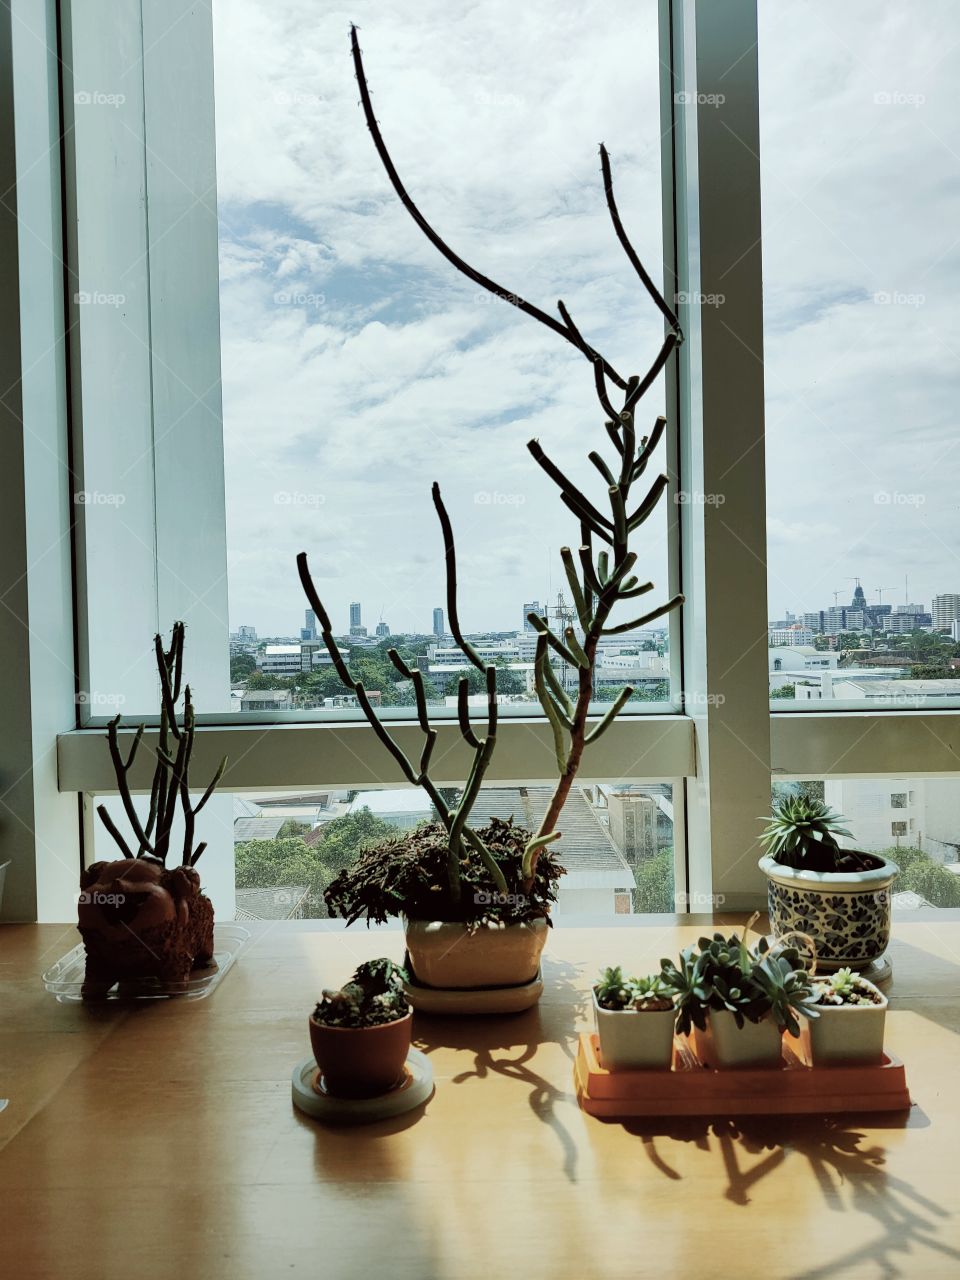 Small trees placed by the window.